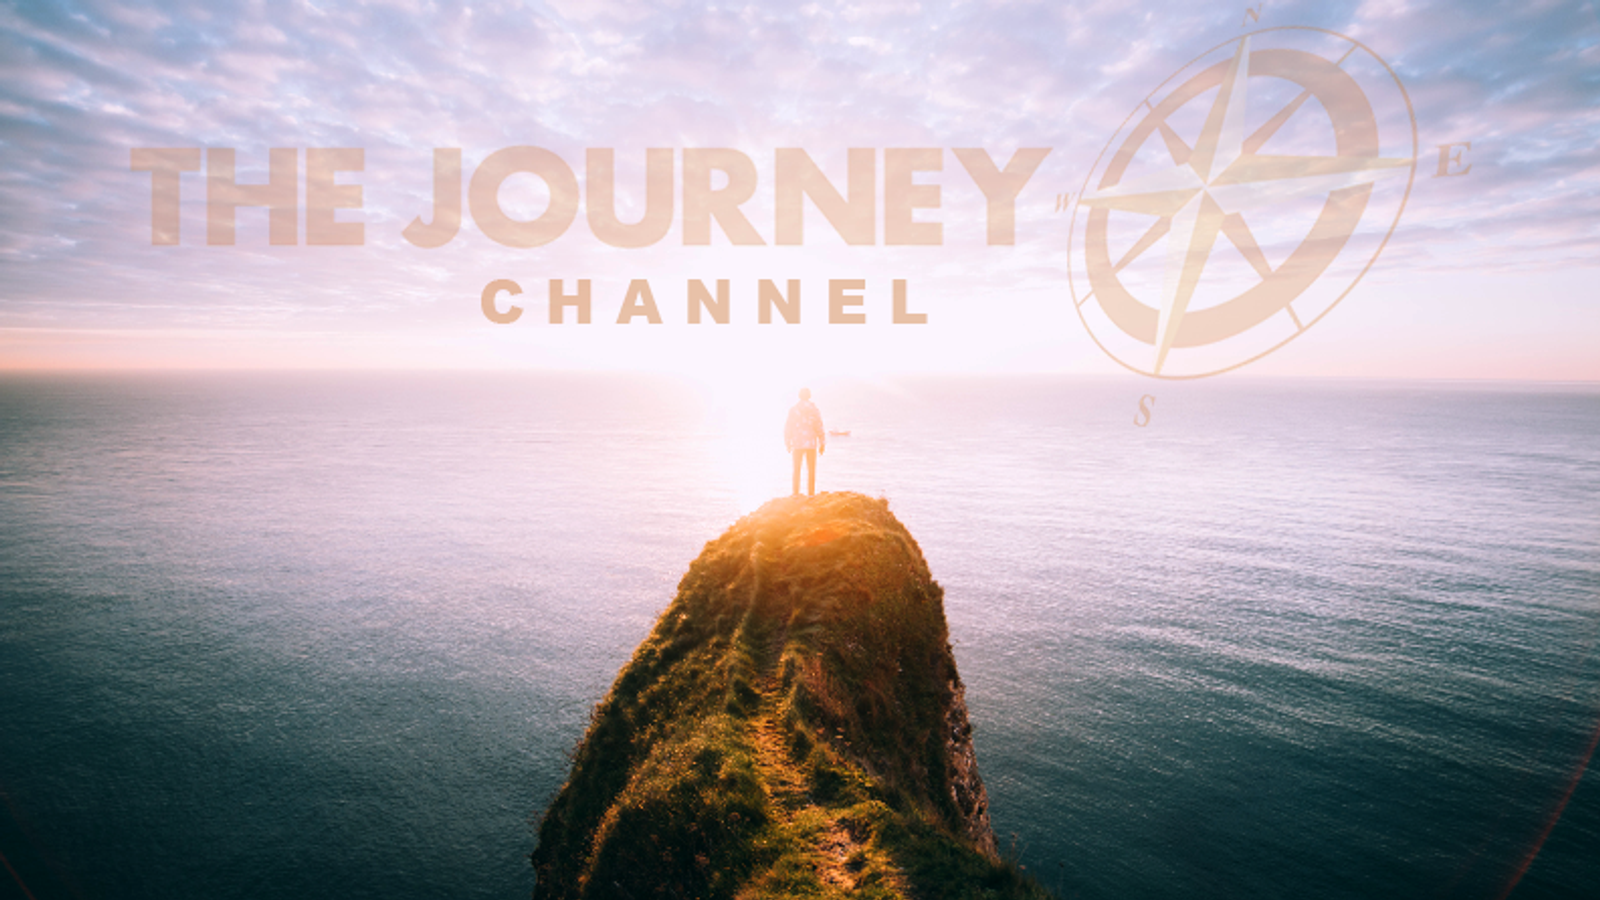 The Journey Channel